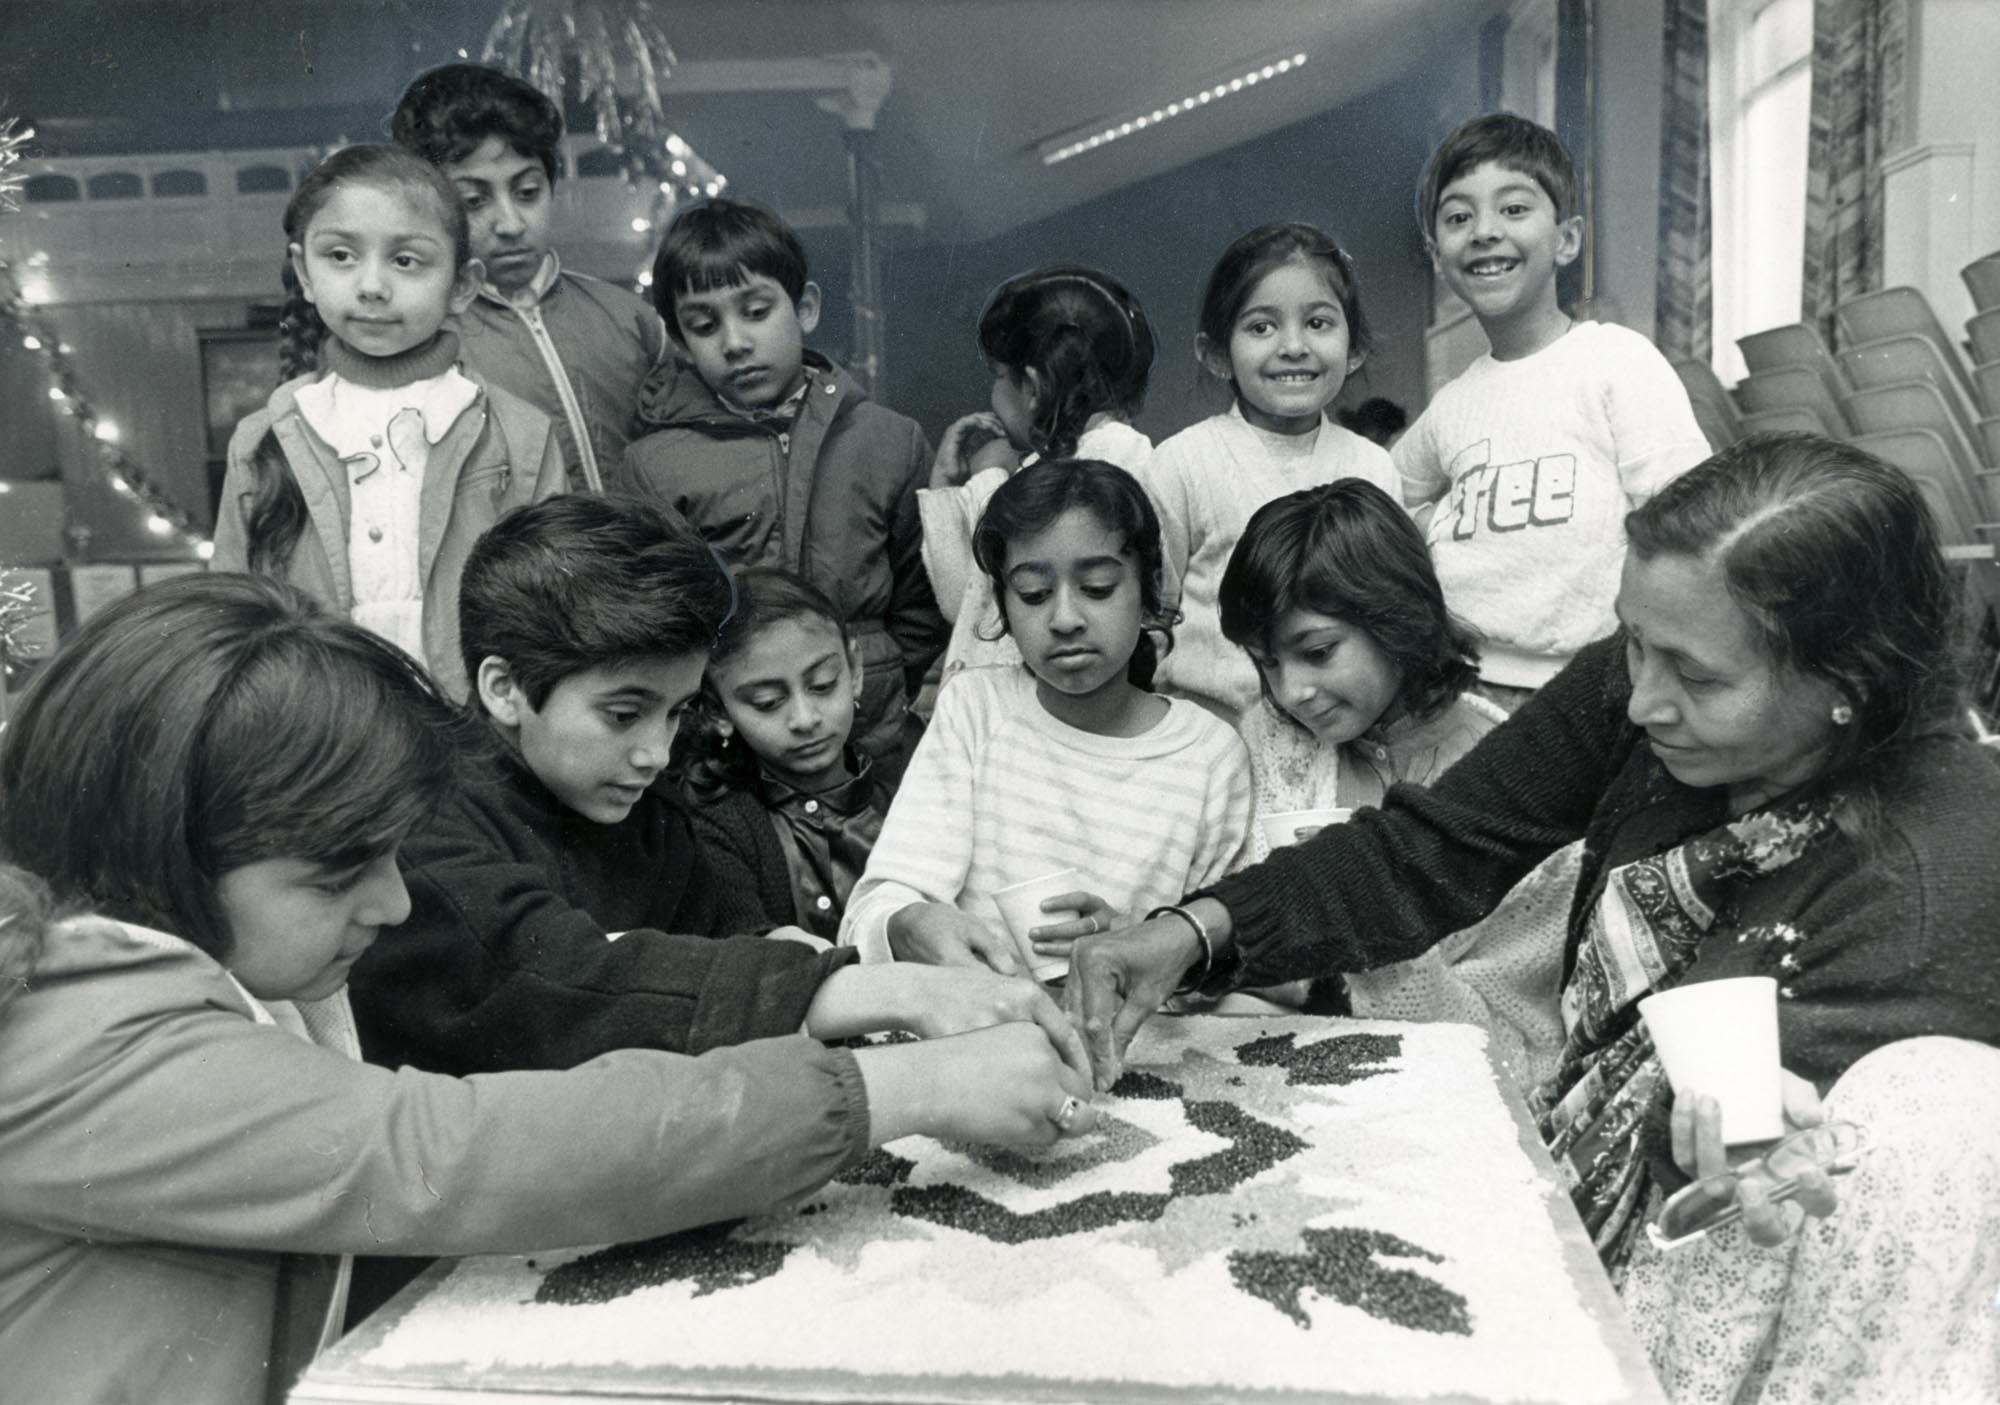 Teaching children how to make rangoli patterns at Belgrave Neighbourhood Centre - Leicester Mercury Archive at the University of Leicester